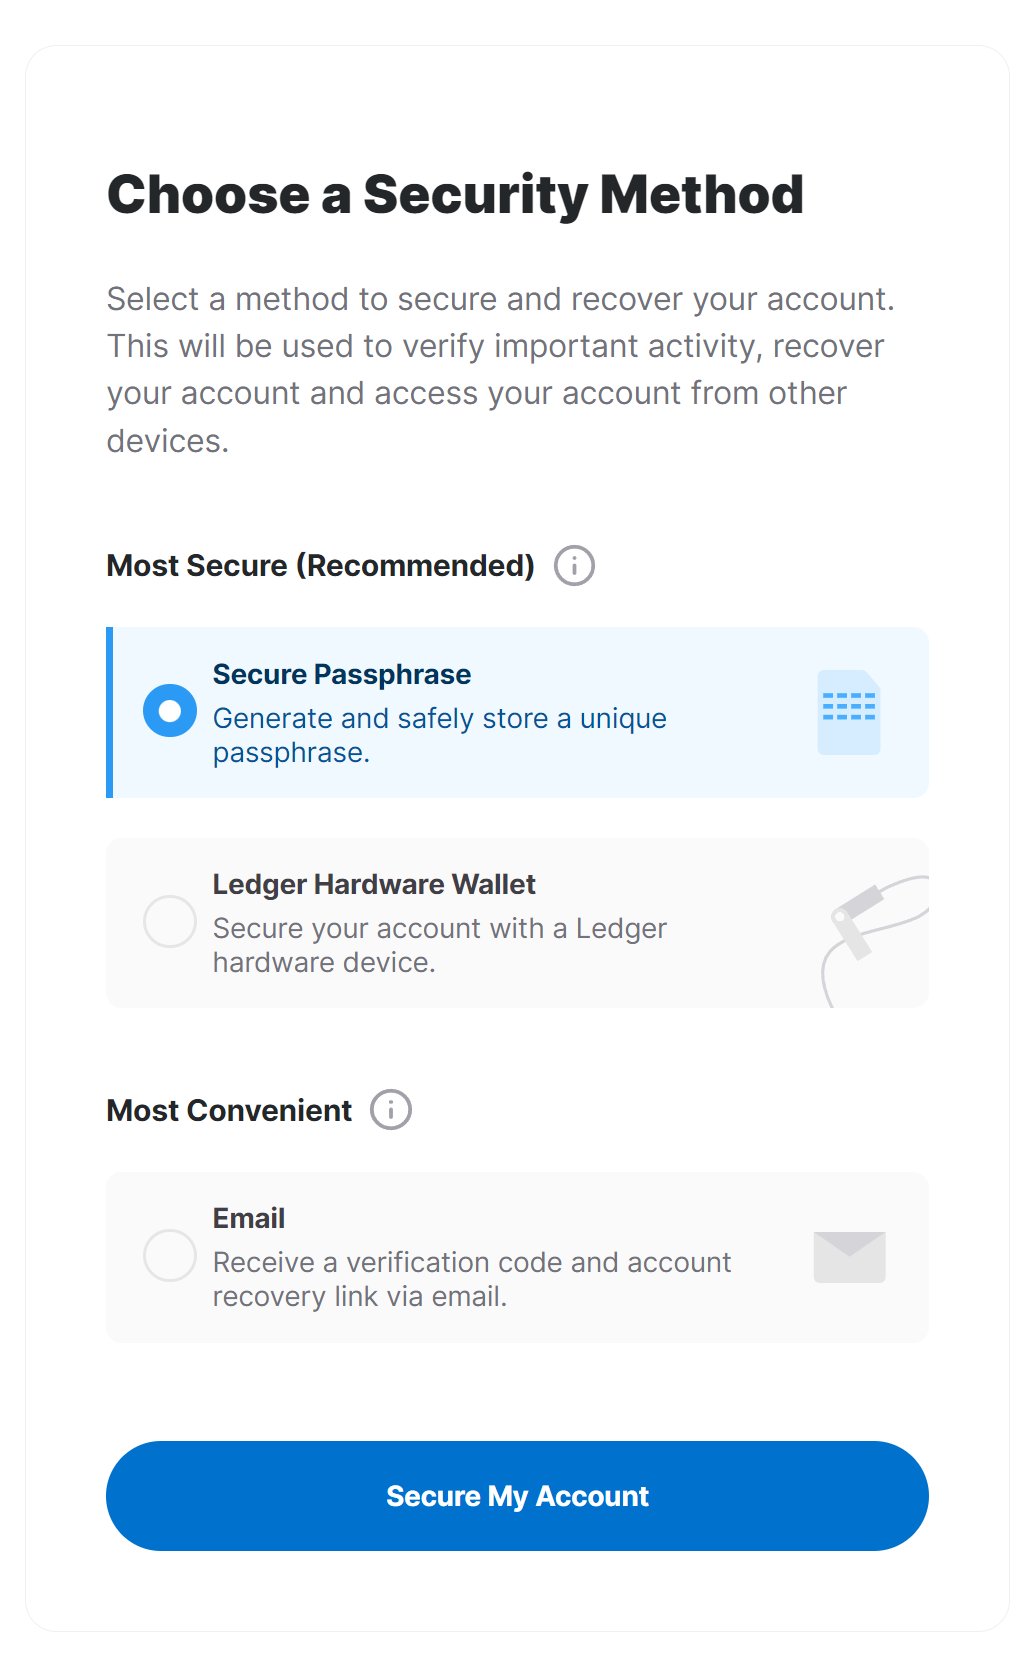 Choose a Security Method Page. The options are Secure Passphrase, Ledger Hardware Wallet, and Email. Email is not recommended. Secure Passphrase is a much safer option, but having a Ledger Hardware Wallet is the most secure.